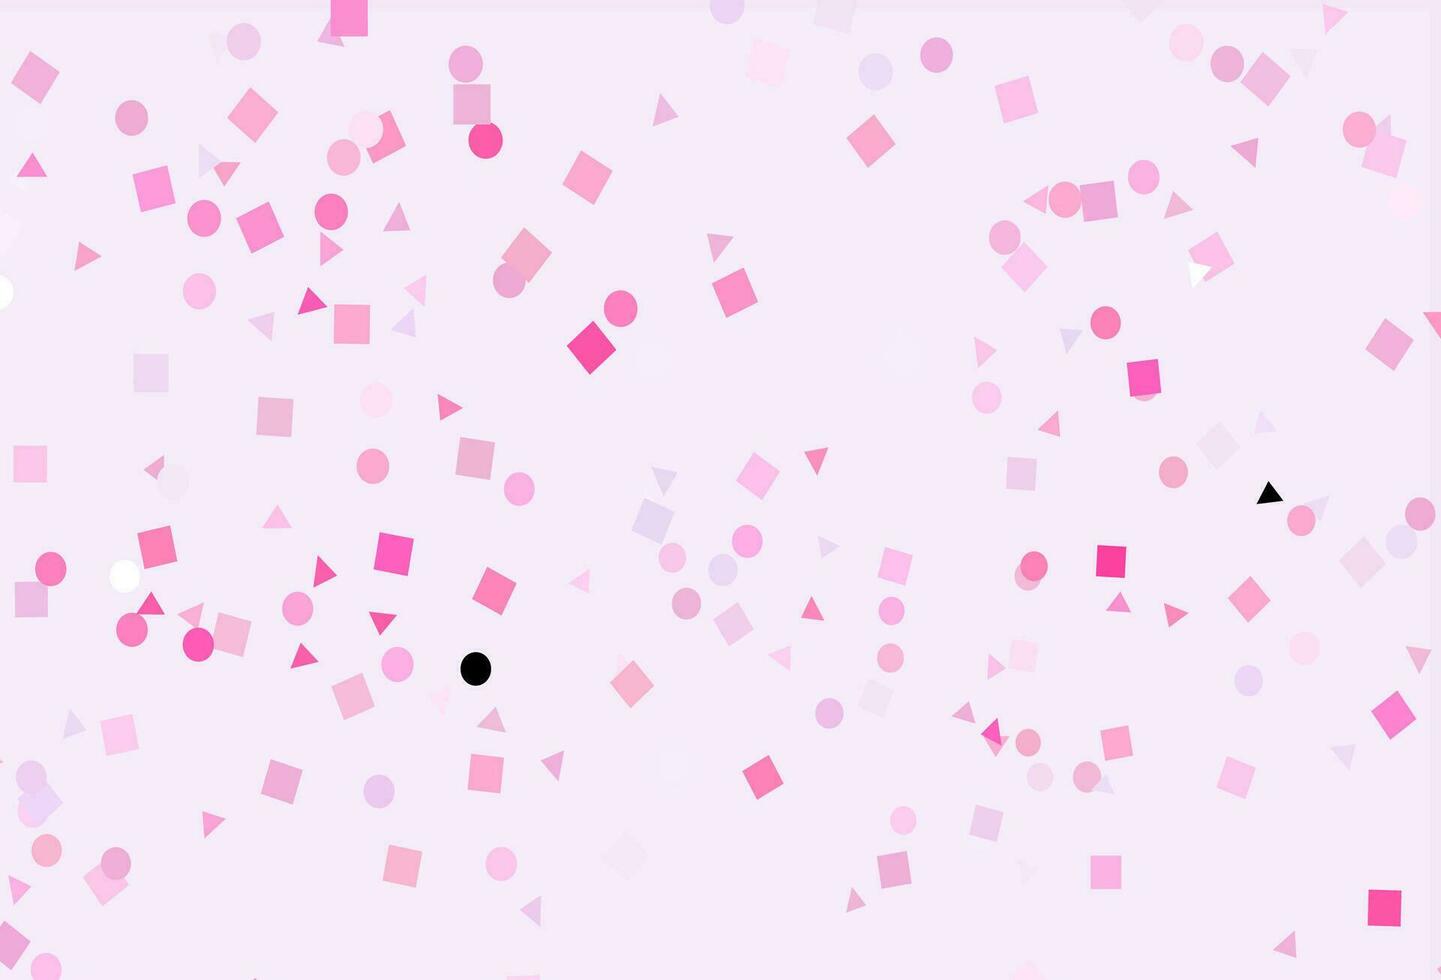 Light Pink, Blue vector backdrop with lines, circles, rhombus.